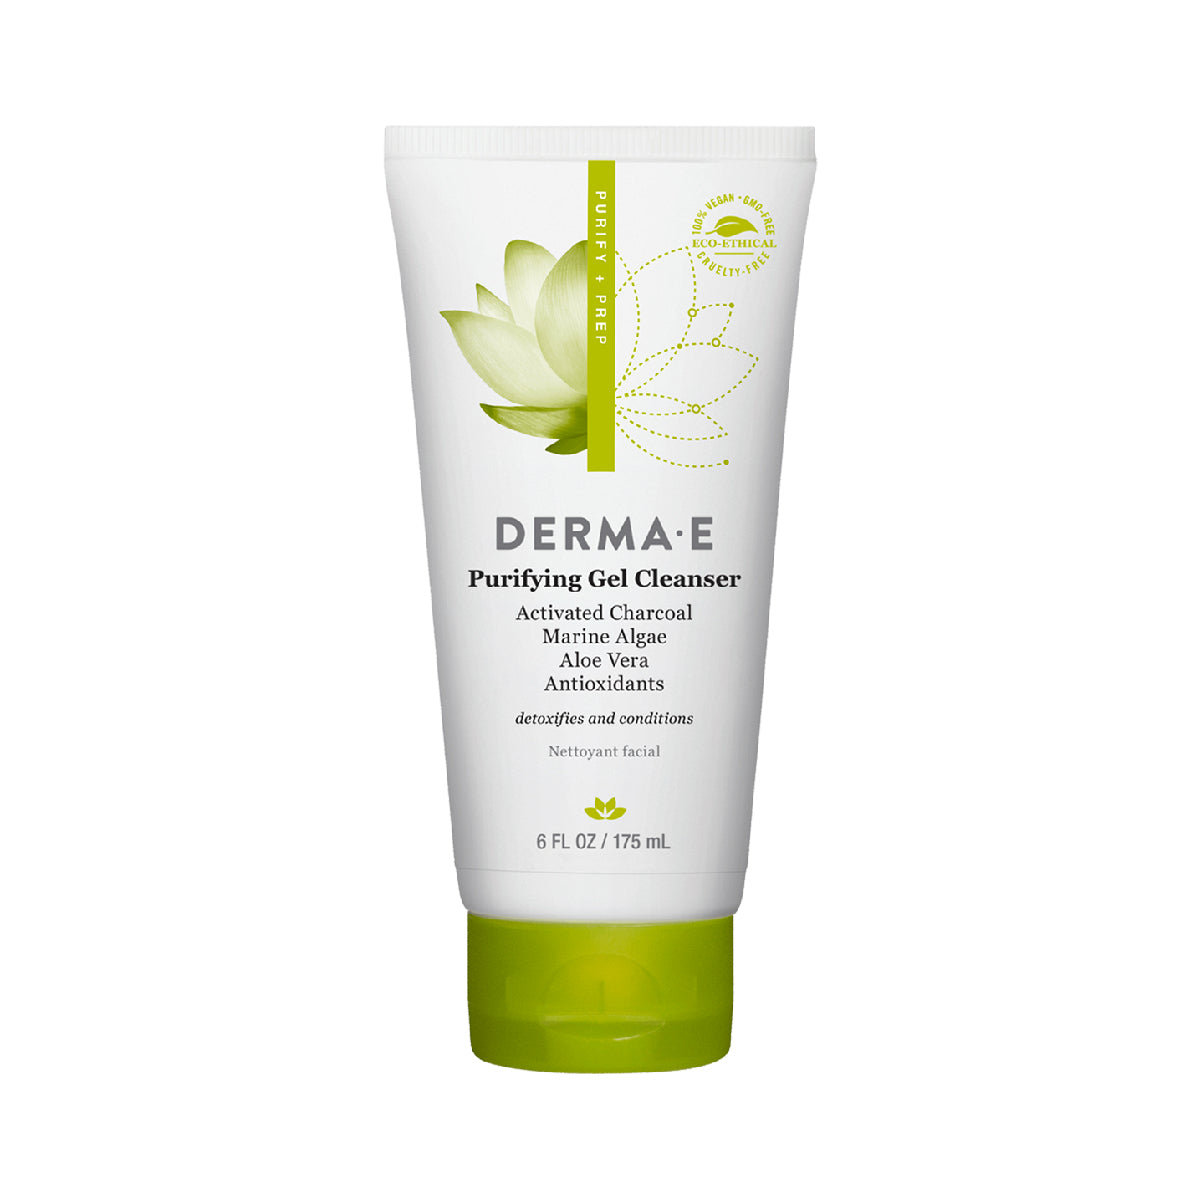 DERMA E Purifying Gel Cleanser with Activated Charcoal